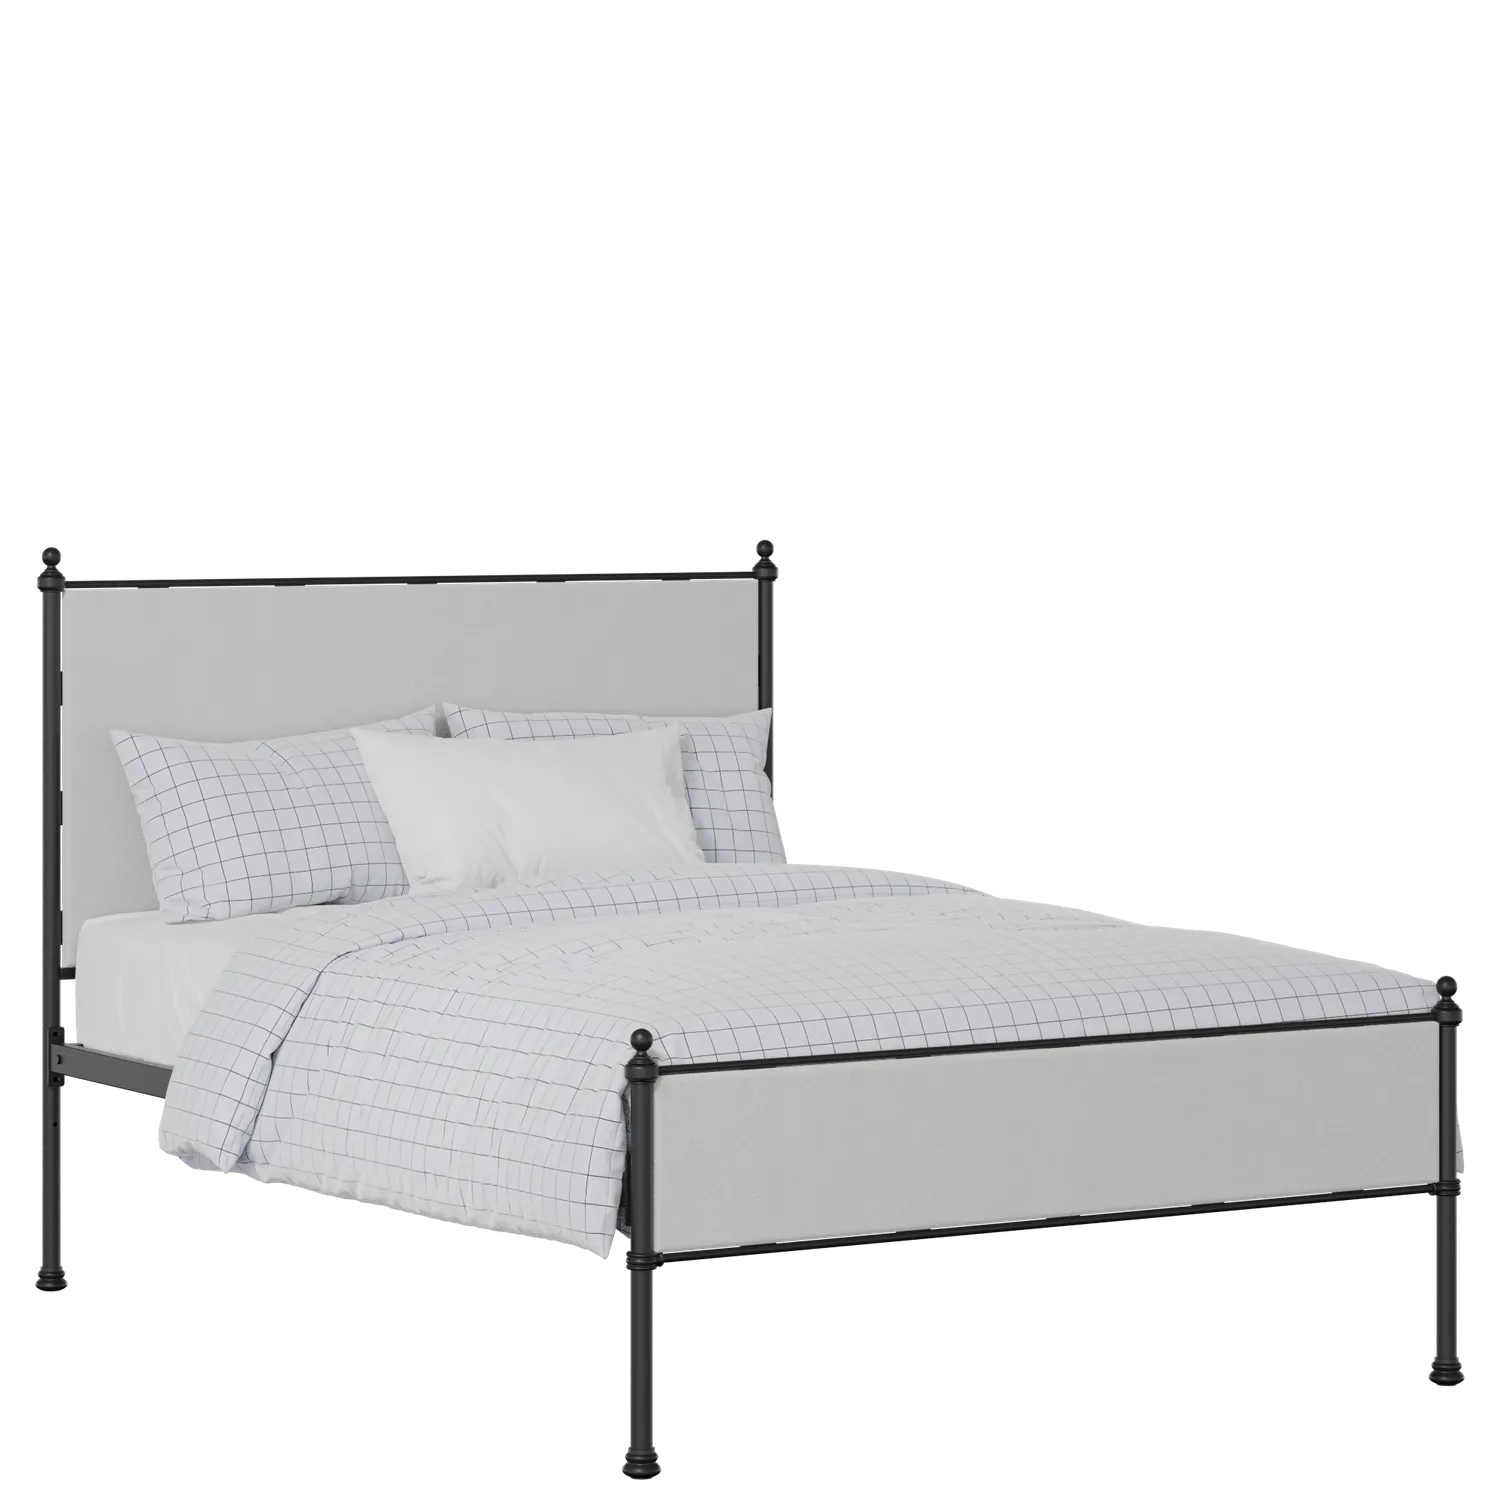 Neville Slim iron/metal upholstered bed in black with silver fabric